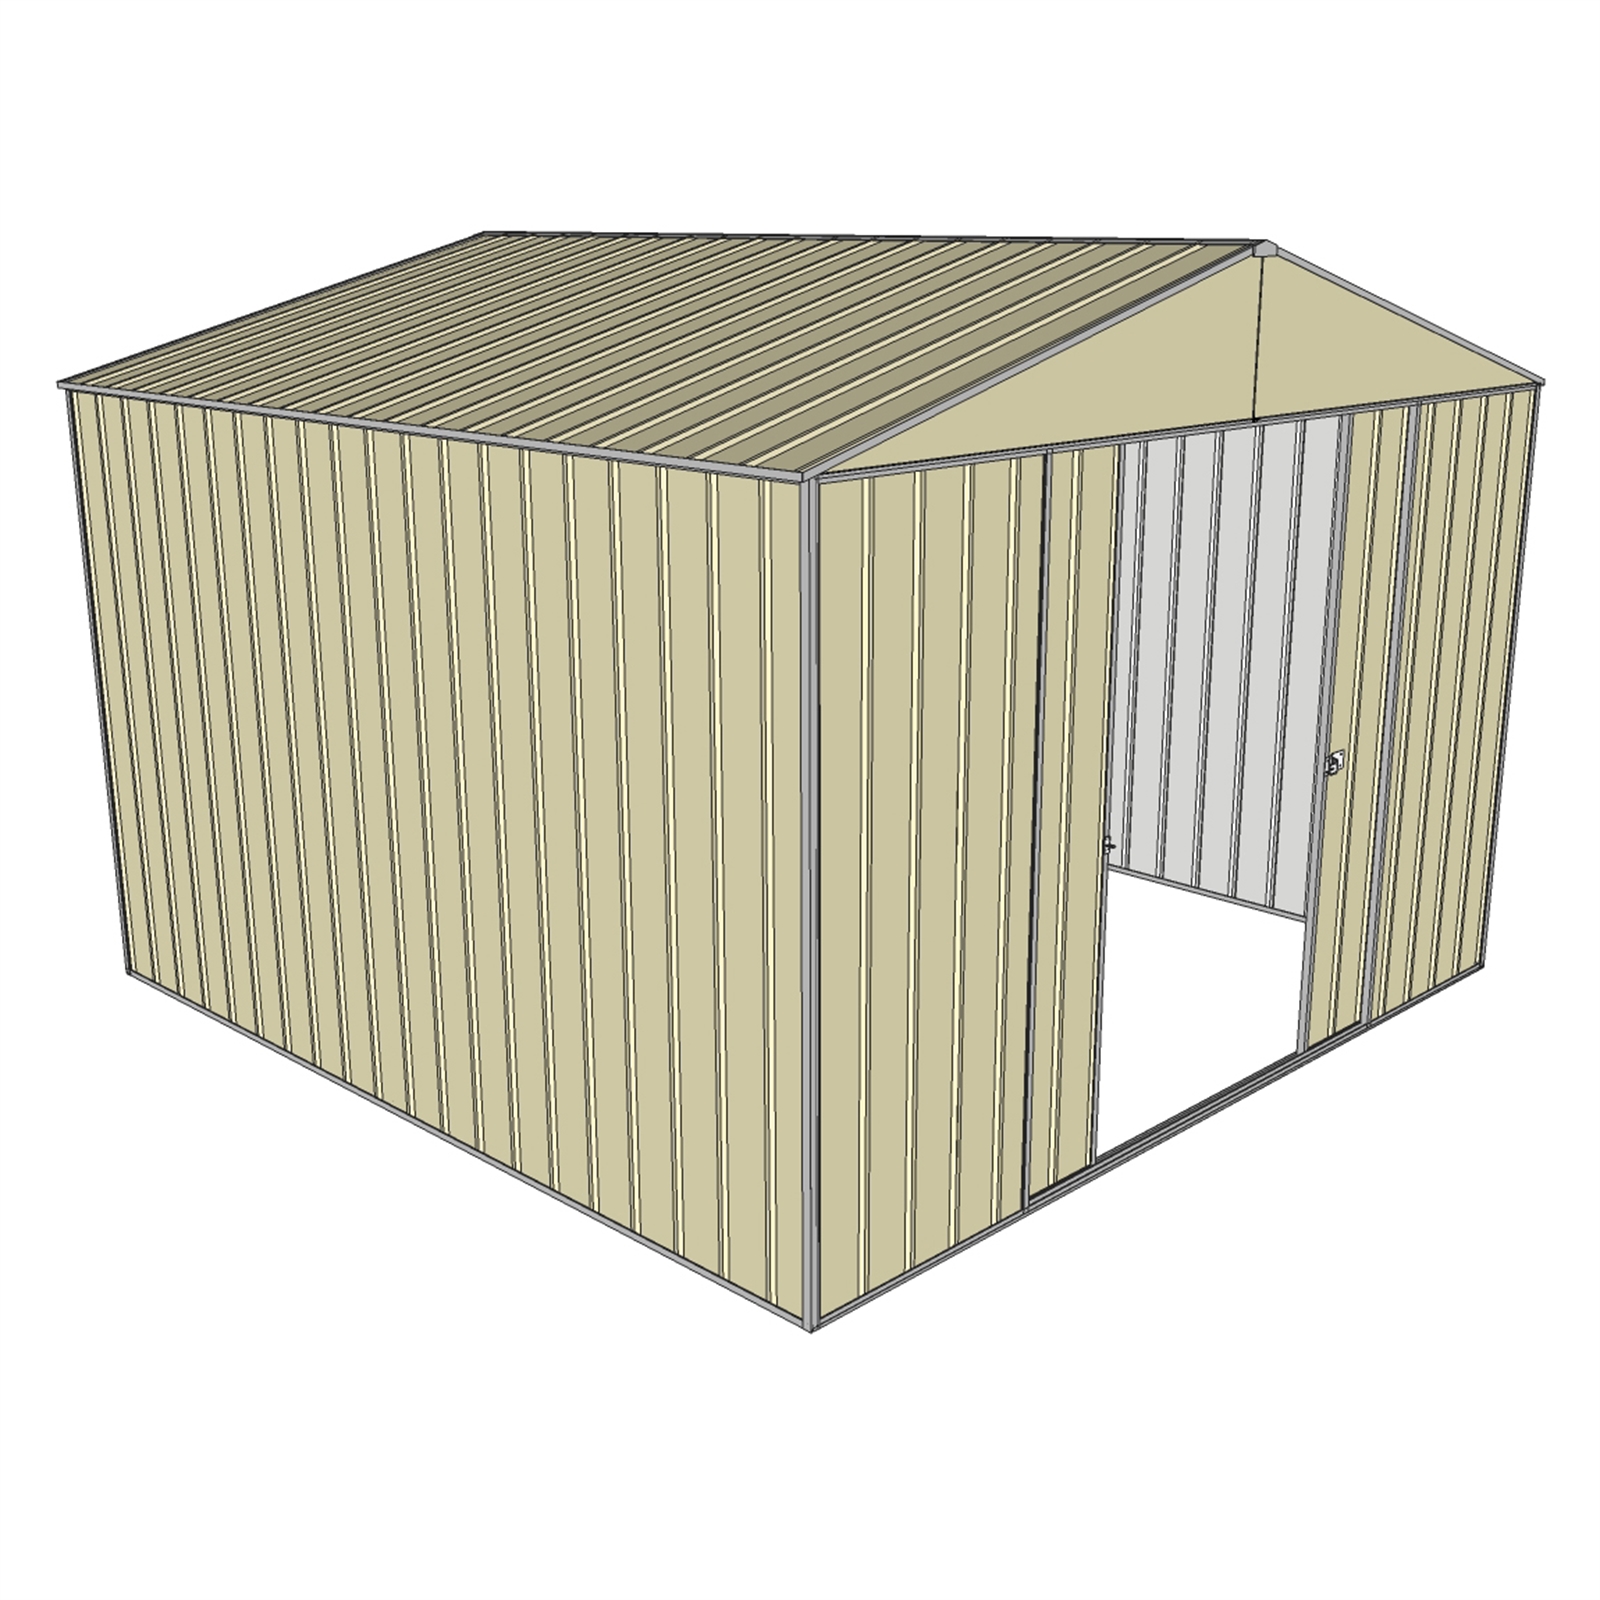 Build-a-Shed 3.0 x 3.0m Cream Double Sliding Door Shed